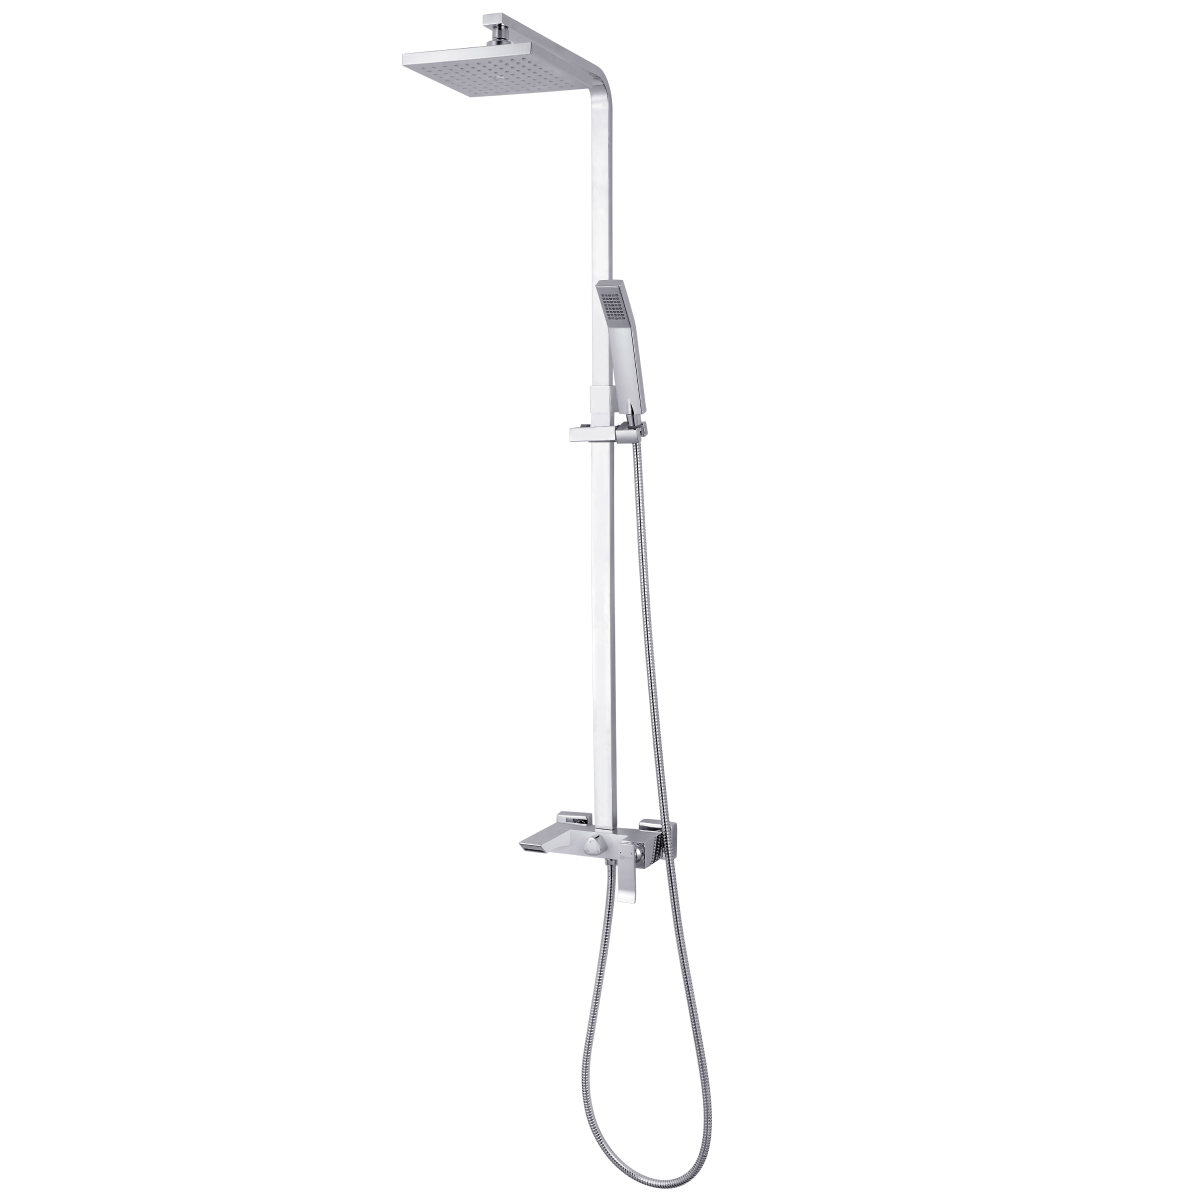 LM5862CW Bath and shower faucet with adjustable rod height, non-swivel spout and «Tropical rain» shower head